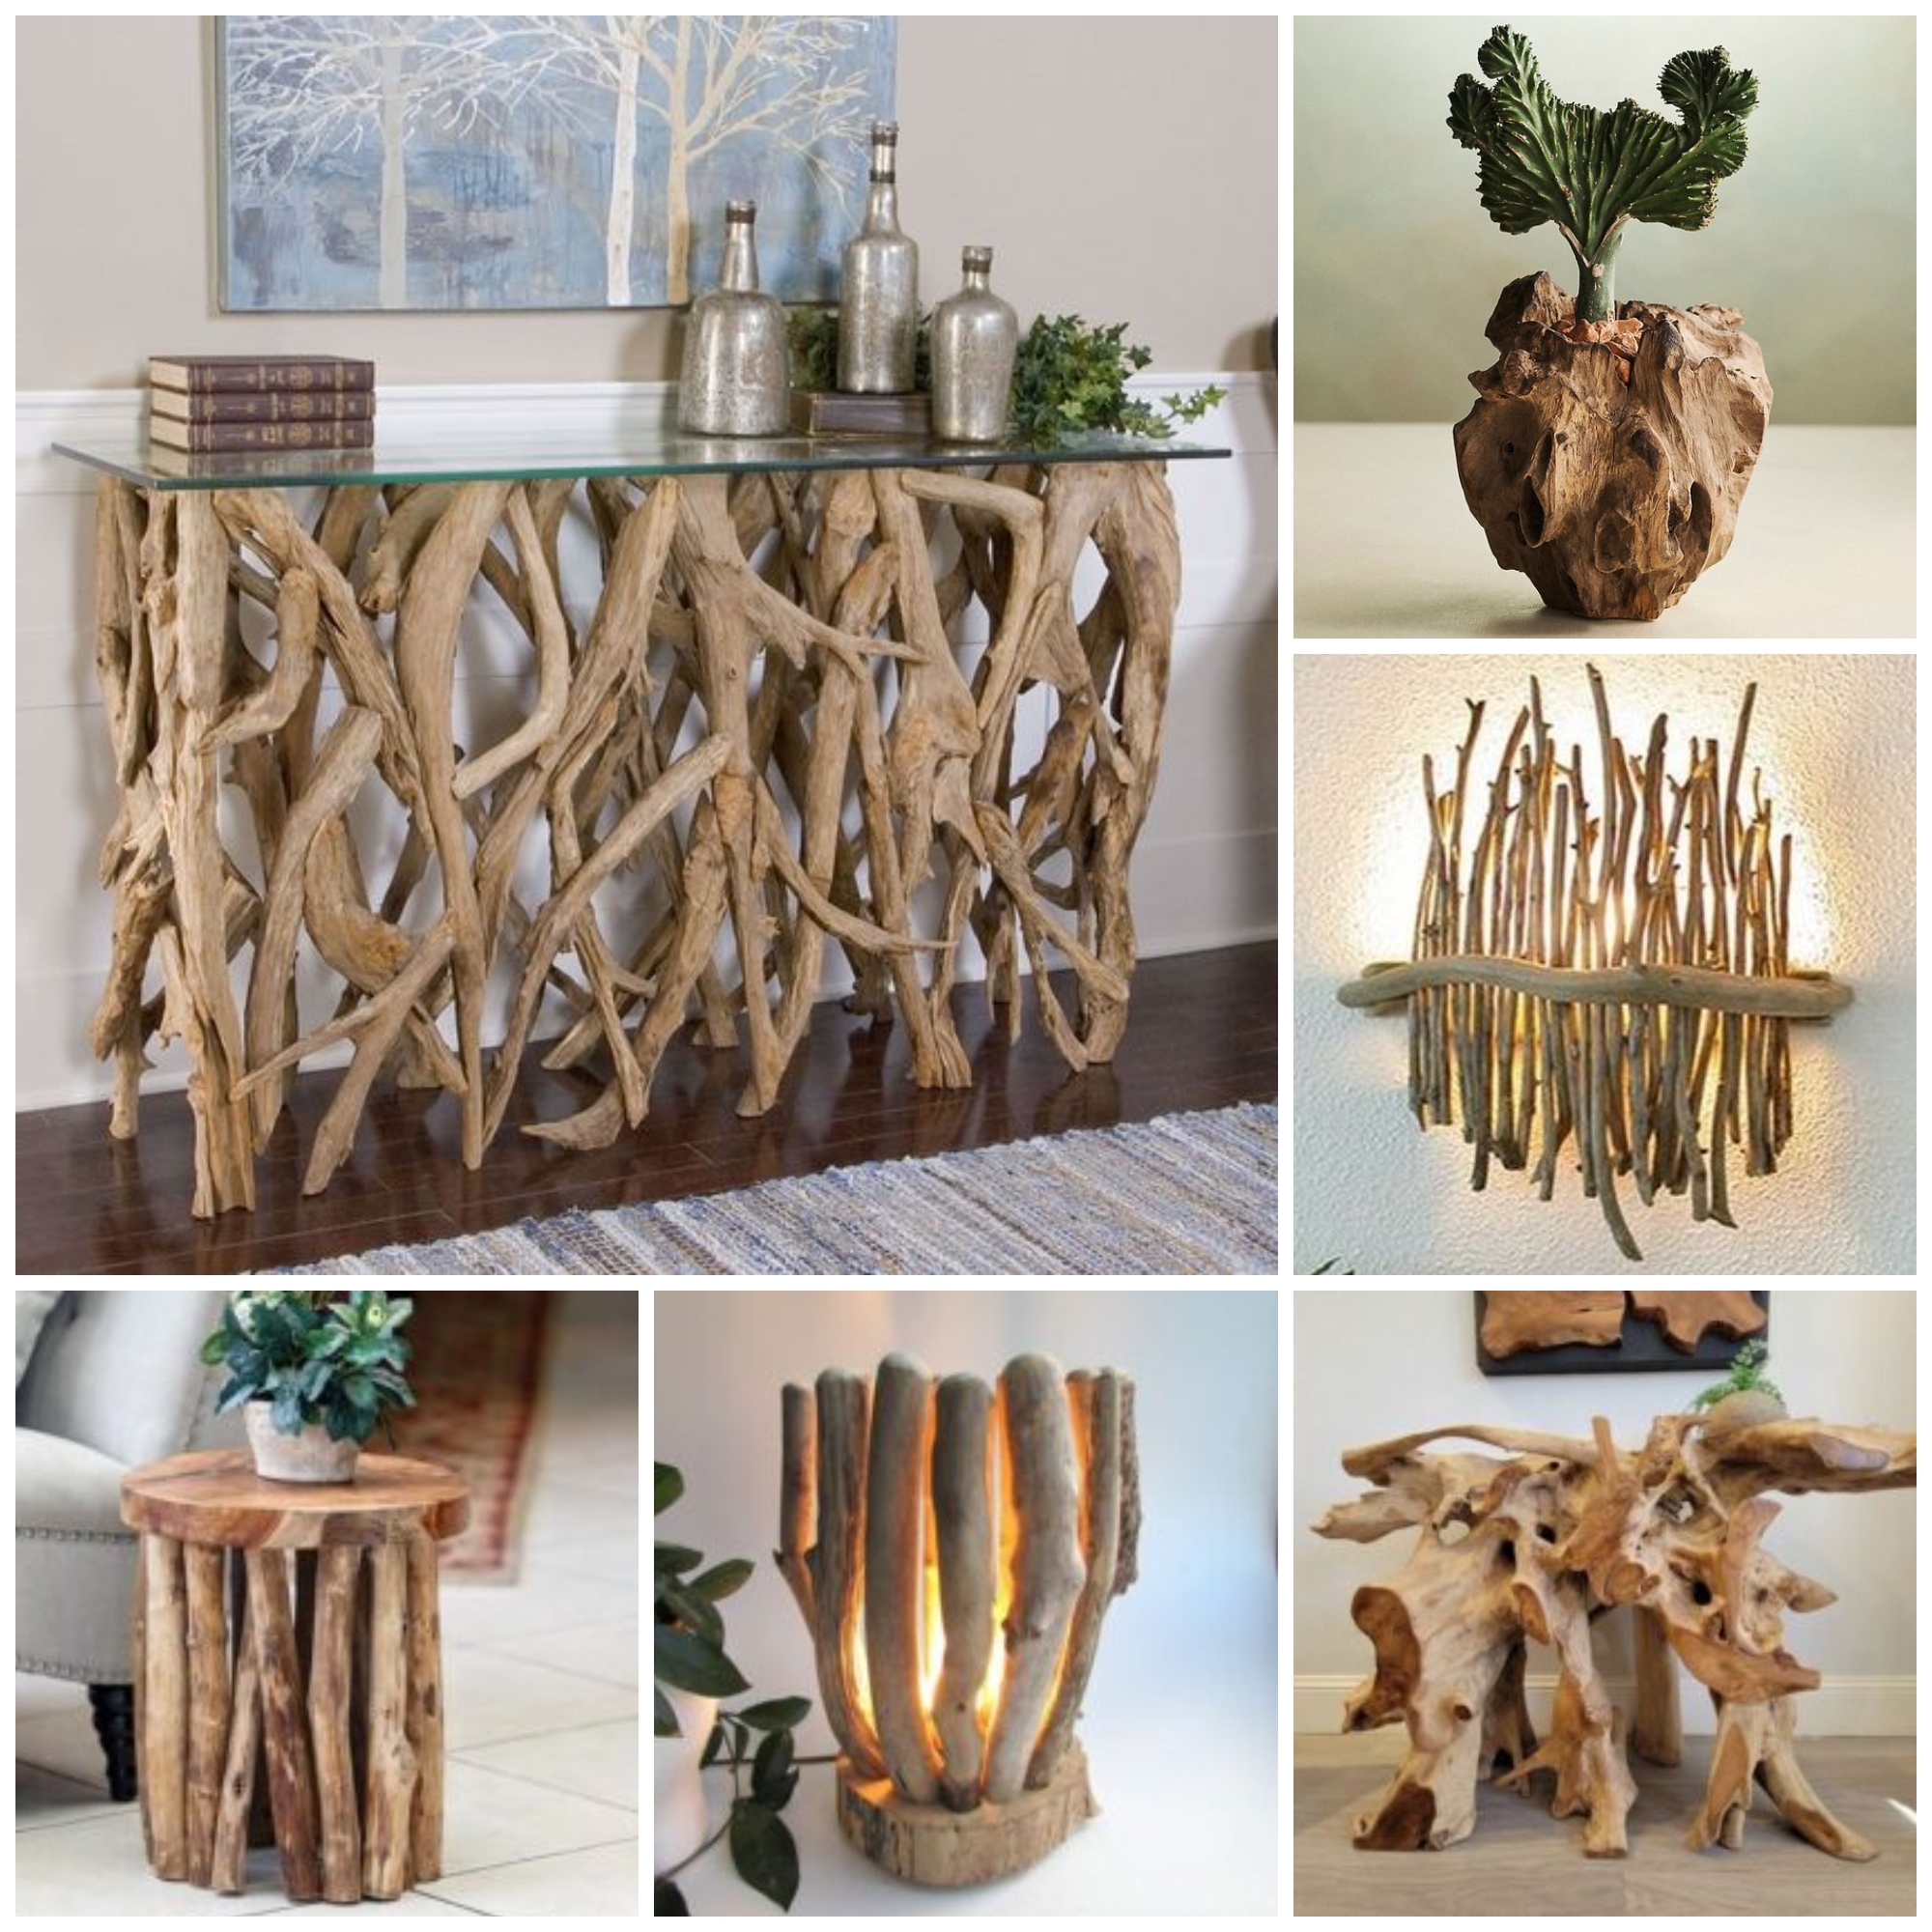 Rustic Furniture Ideas for Countryside-Inspired Interior Themes